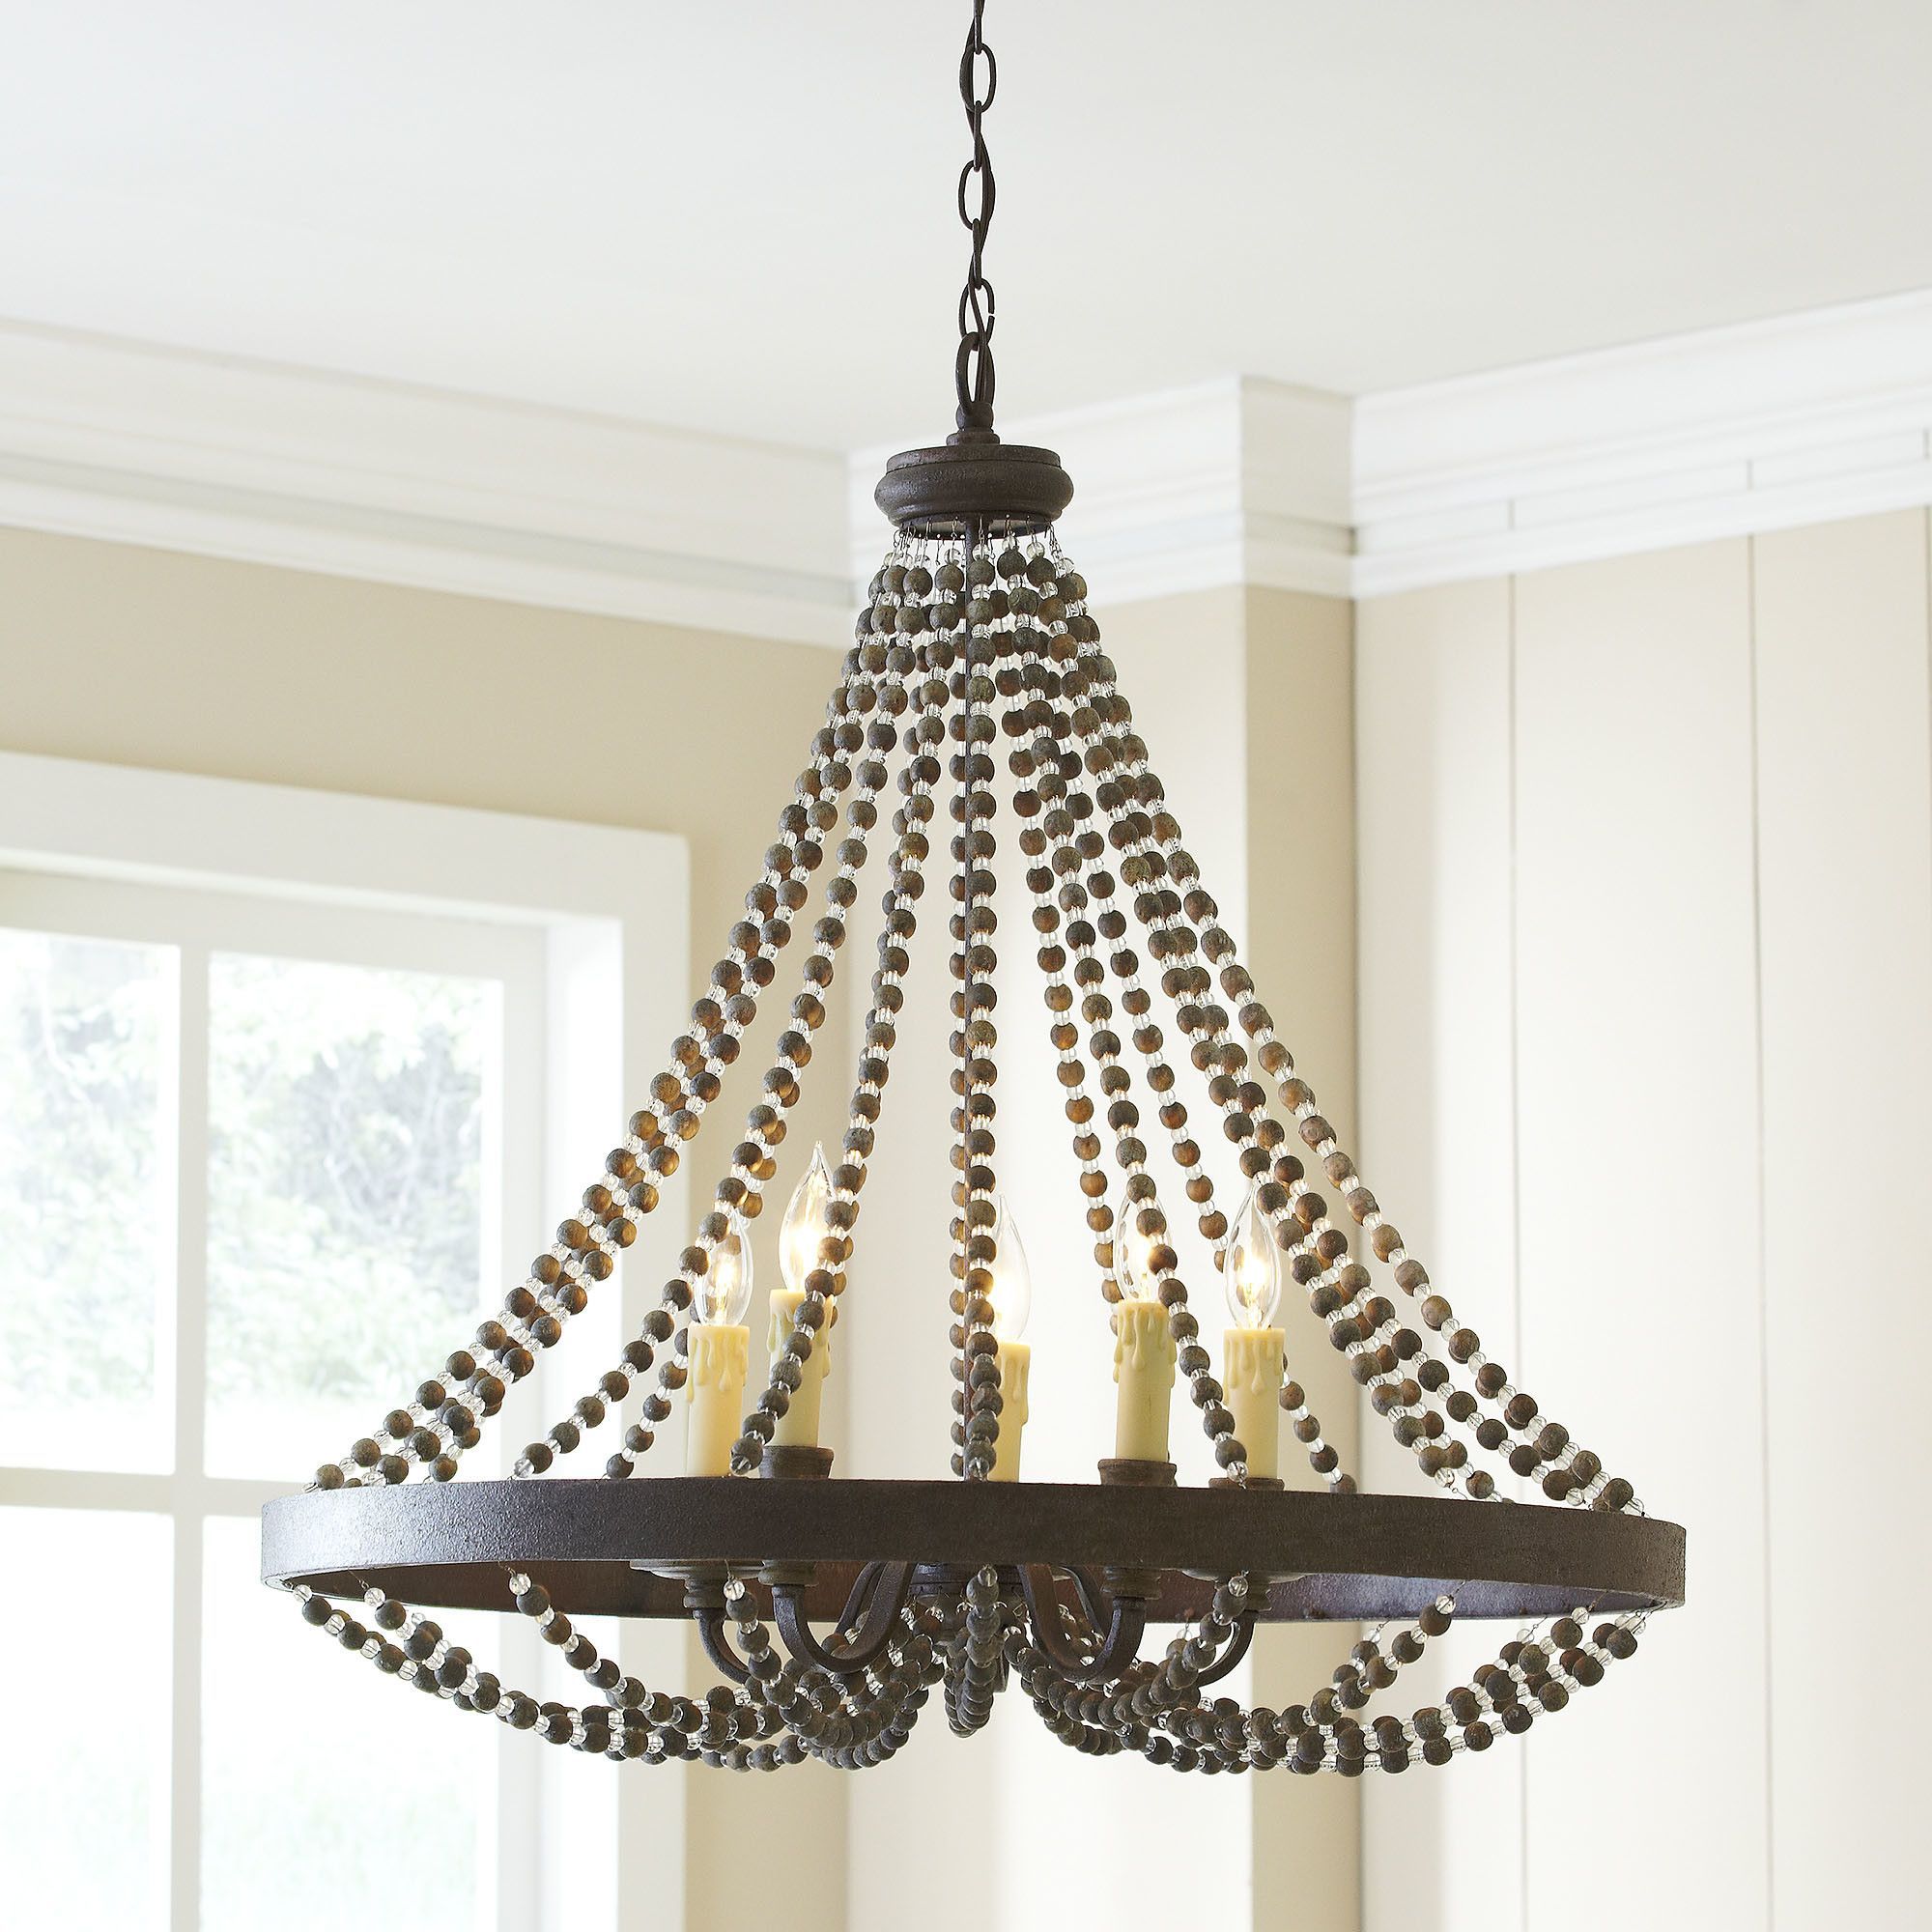 Ladonna 5 Light Novelty Chandelier | The Perfect Piece With Ladonna 5 Light Novelty Chandeliers (View 2 of 30)